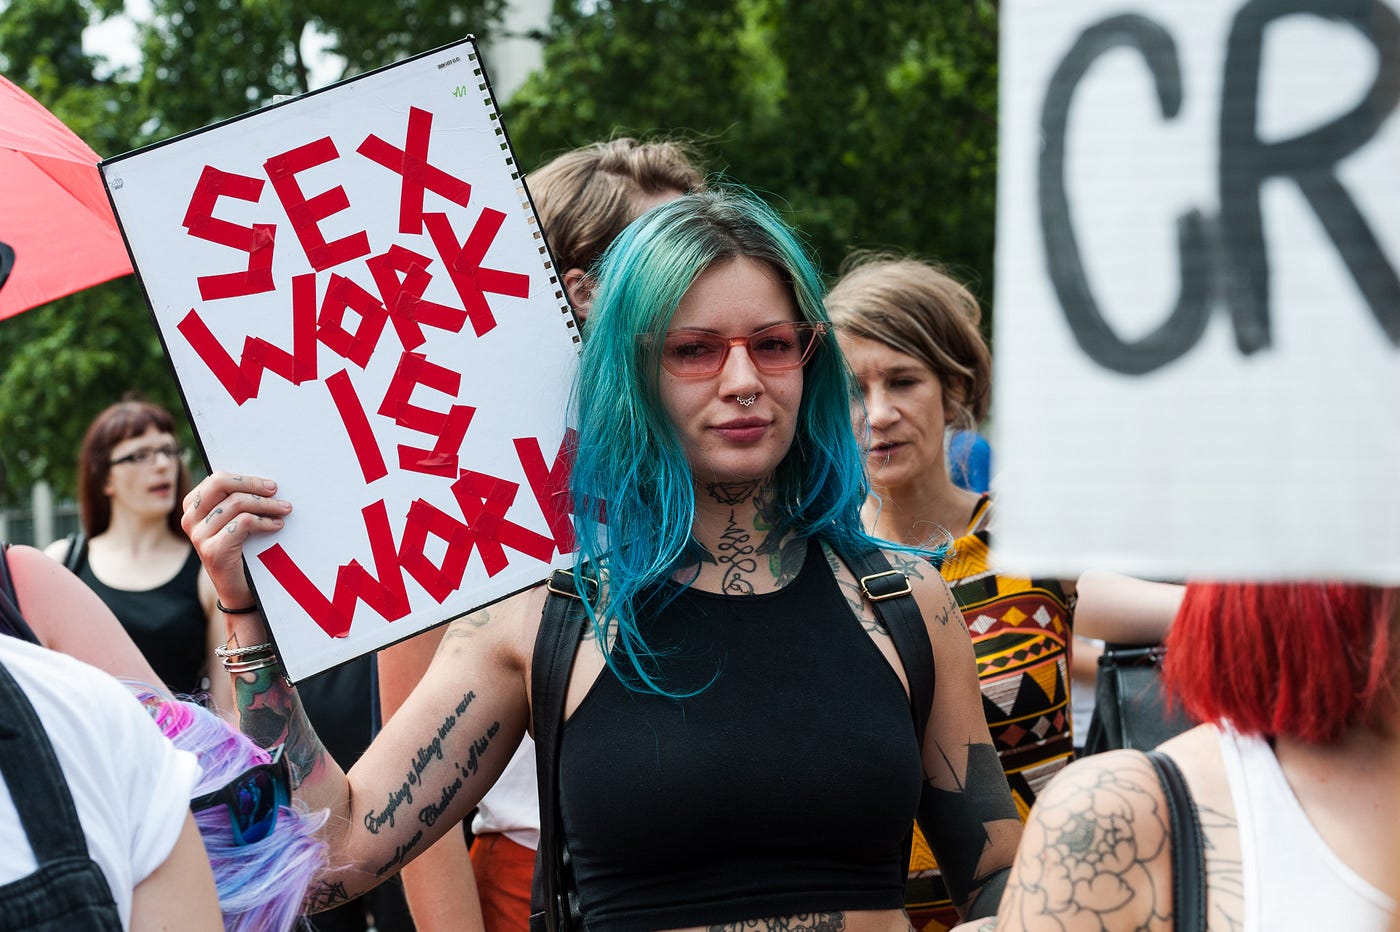 Sex Workers Rights Are Officially a Mainstream Political Issue by Andrea González-Ramírez pic